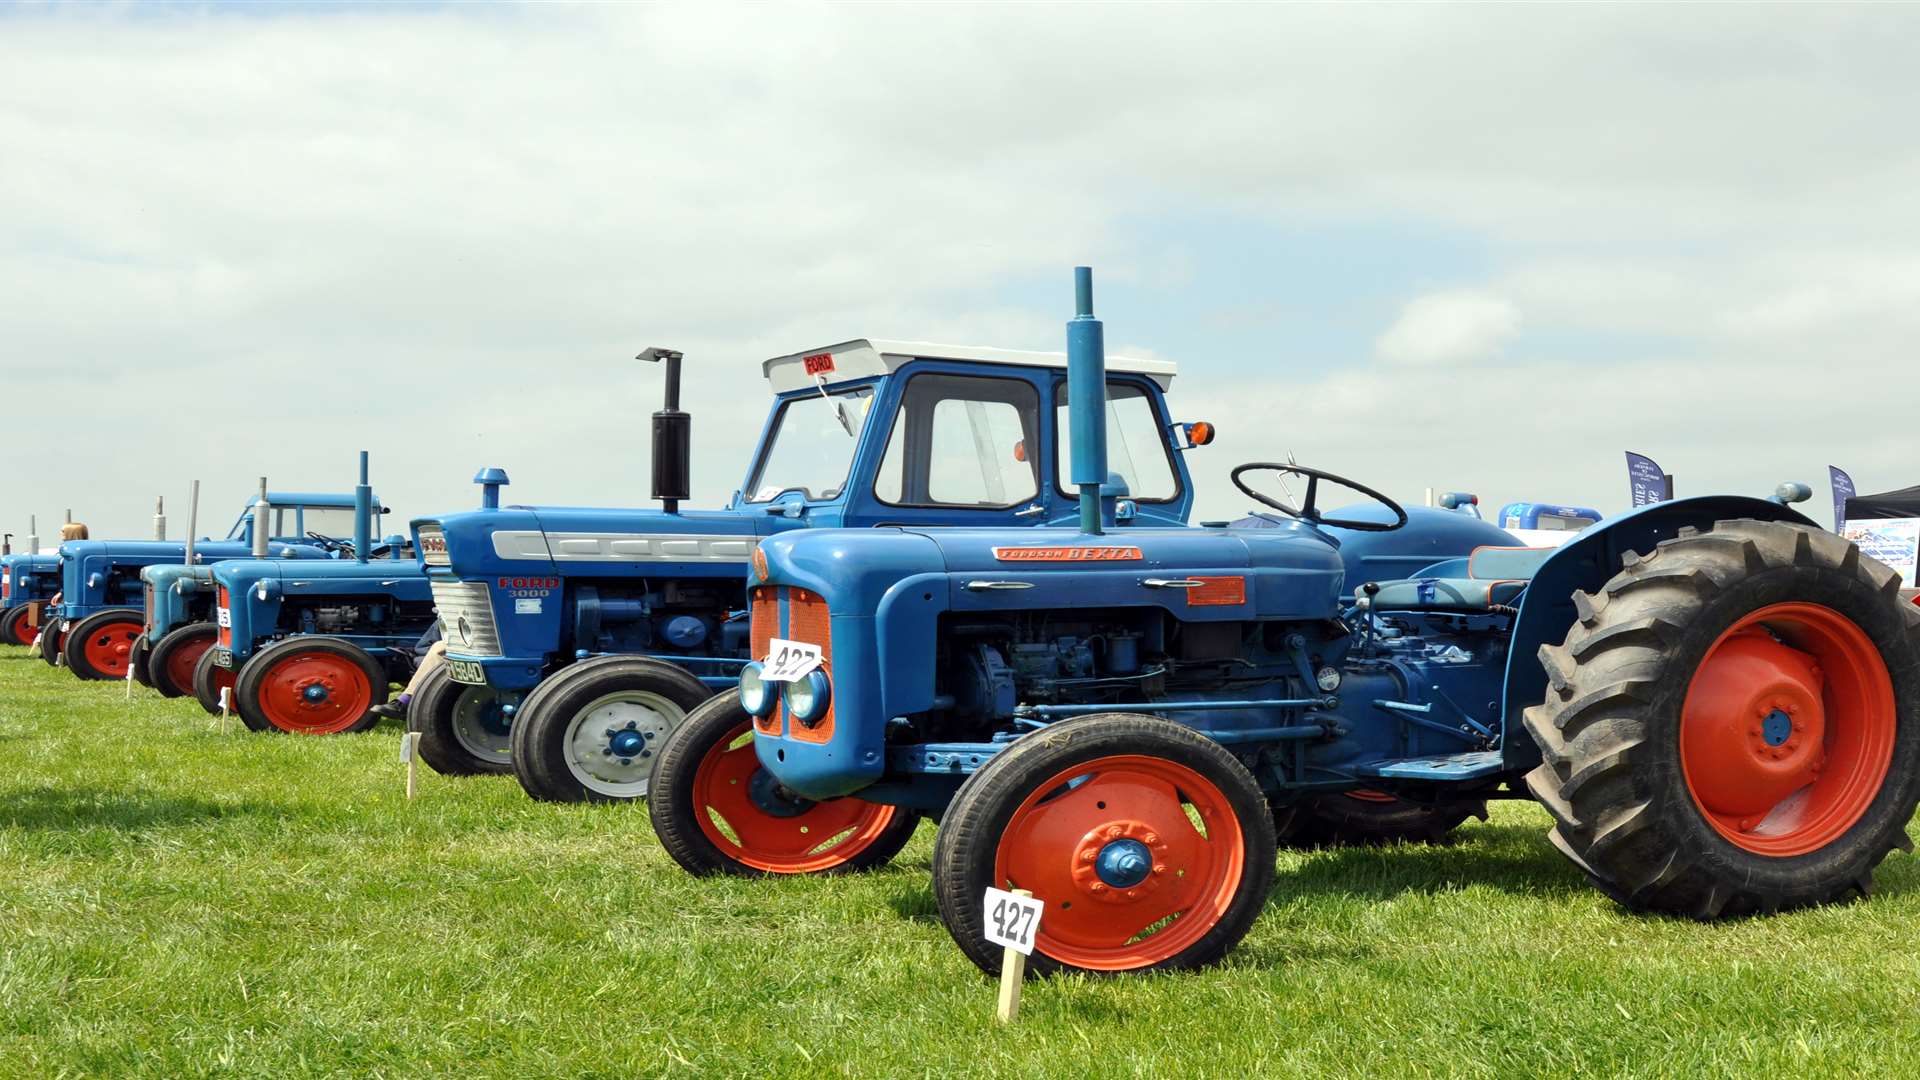 The Tractor and Smallholding Show comes to the Hop Farm Family Park near Paddock Wood